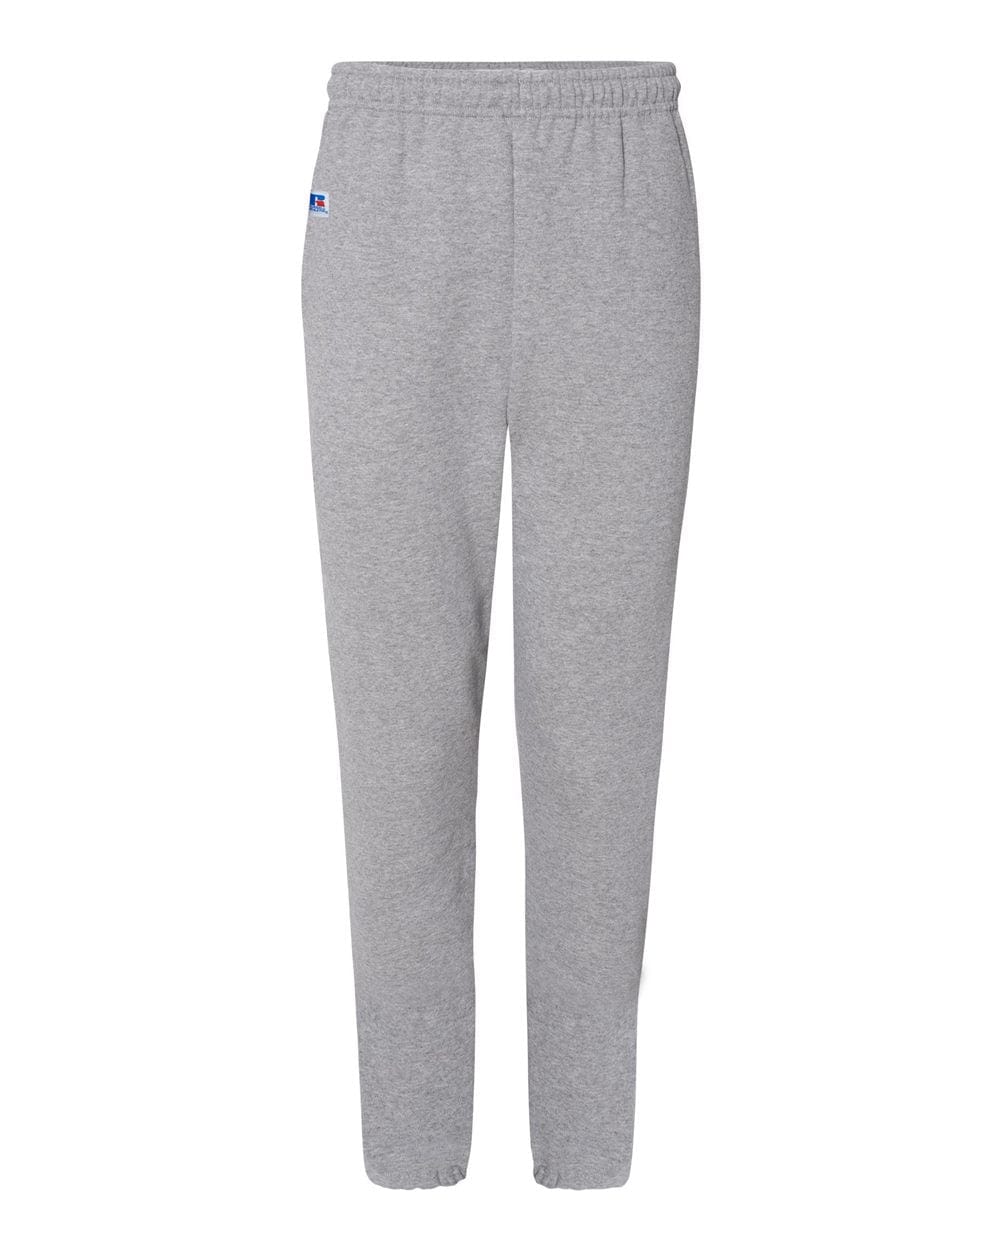 https://threadfellows.com/cdn/shop/products/russell-athletic-bottoms-s-oxford-russell-athletic-men-s-dri-power-closed-bottom-sweatpants-with-pockets-28552907489303_1000x1250.jpg?v=1642023973